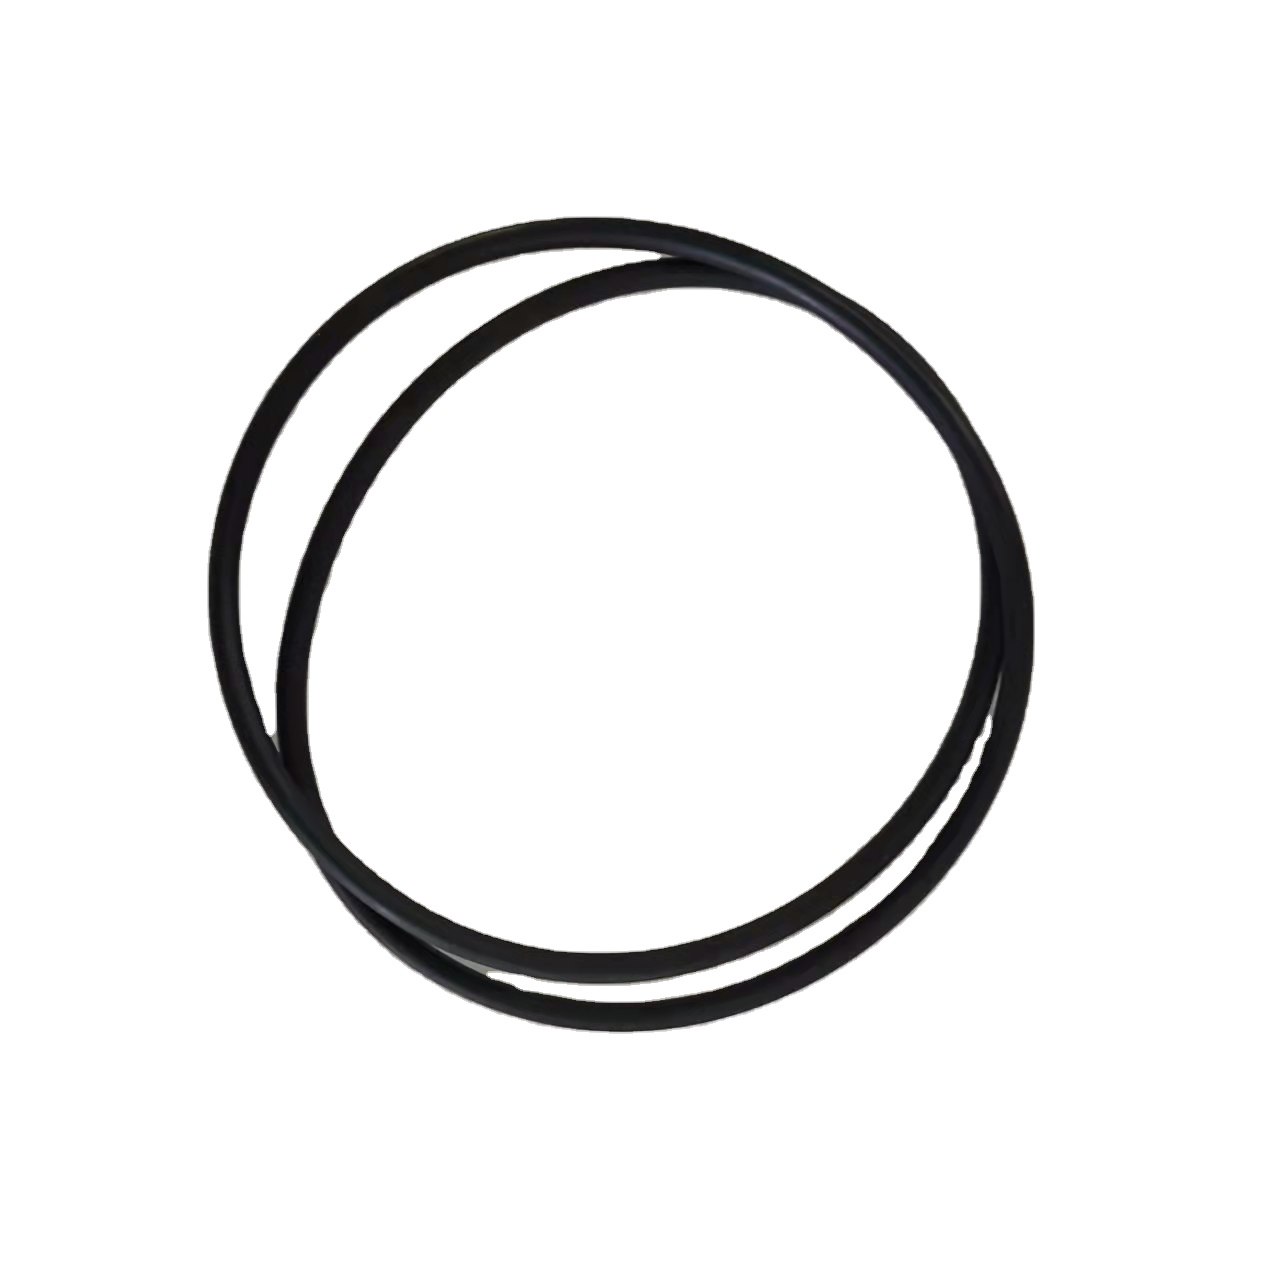 York Chiller Spare Parts Seal Ring O-Ring 028-15132-000 - 副本